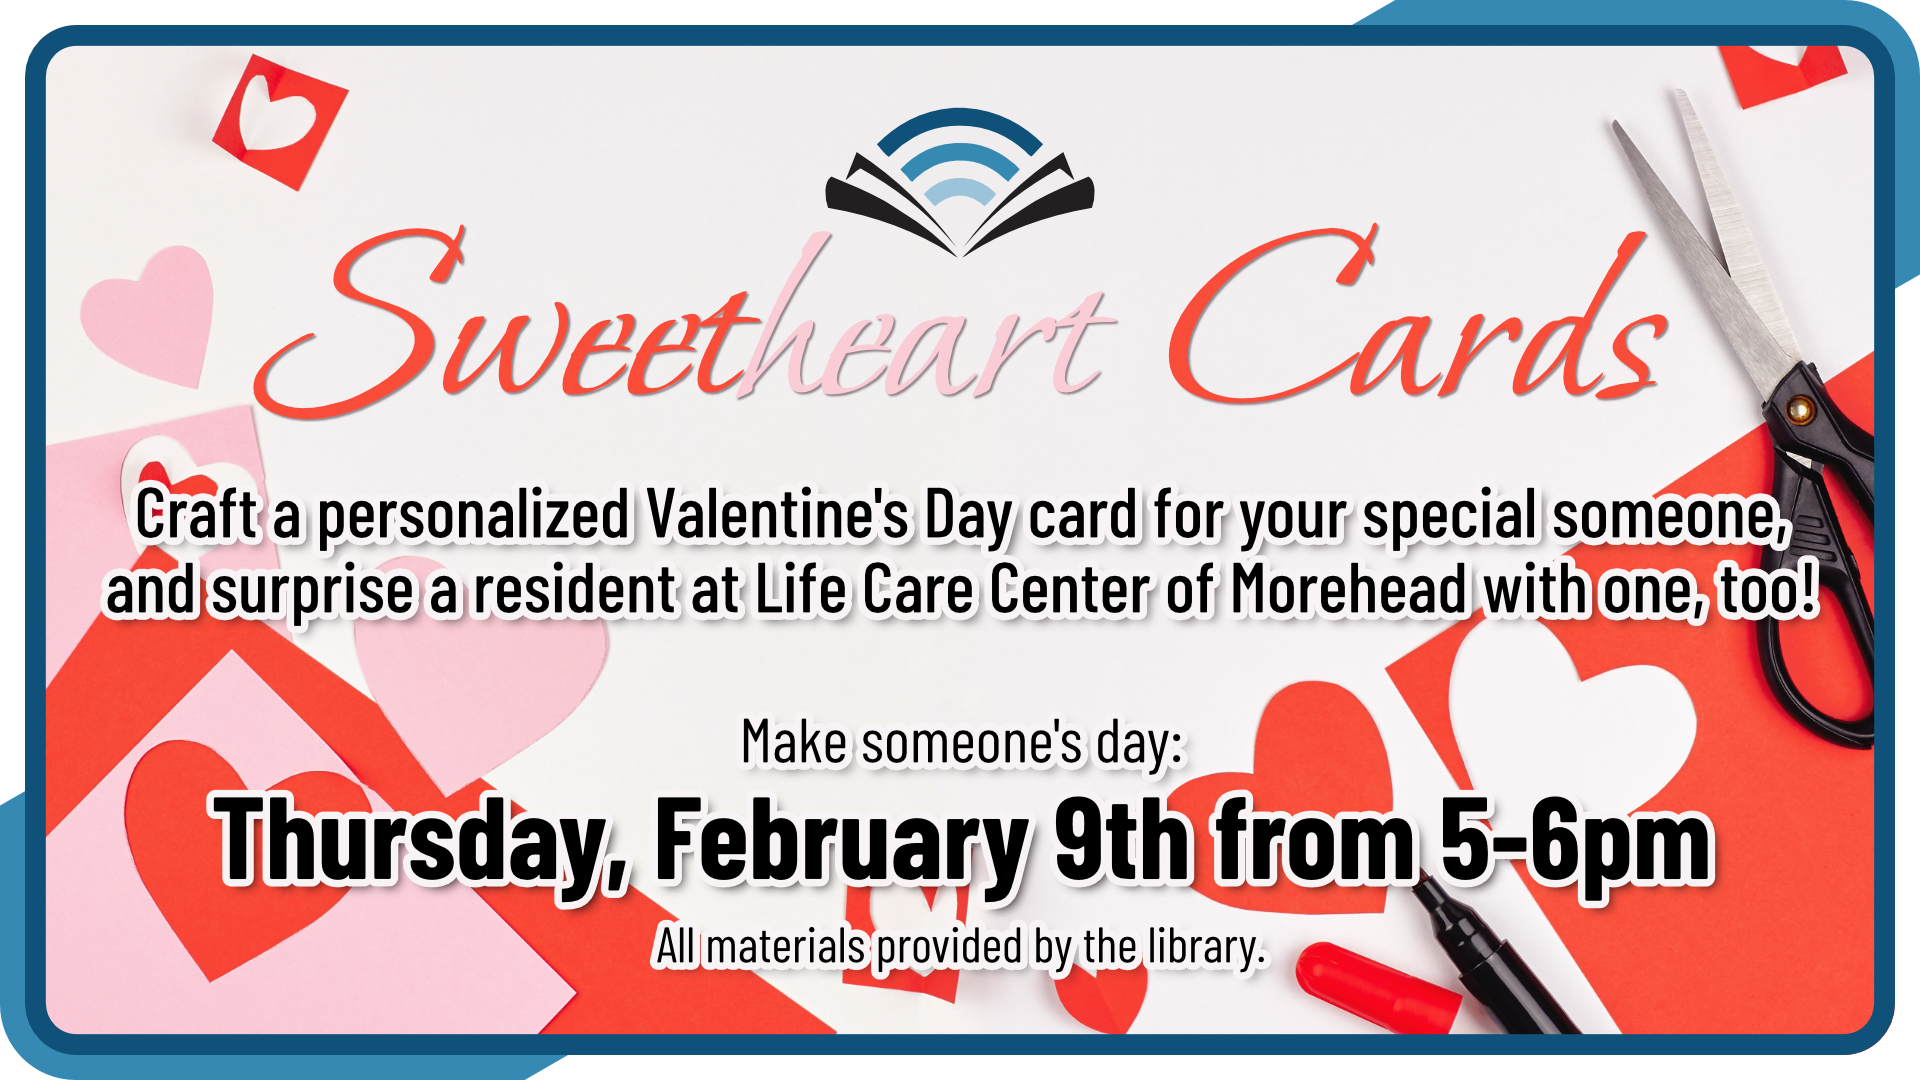 SweetheART Cards, February 9th from 5 to 6pm, intended for ages 5 and up